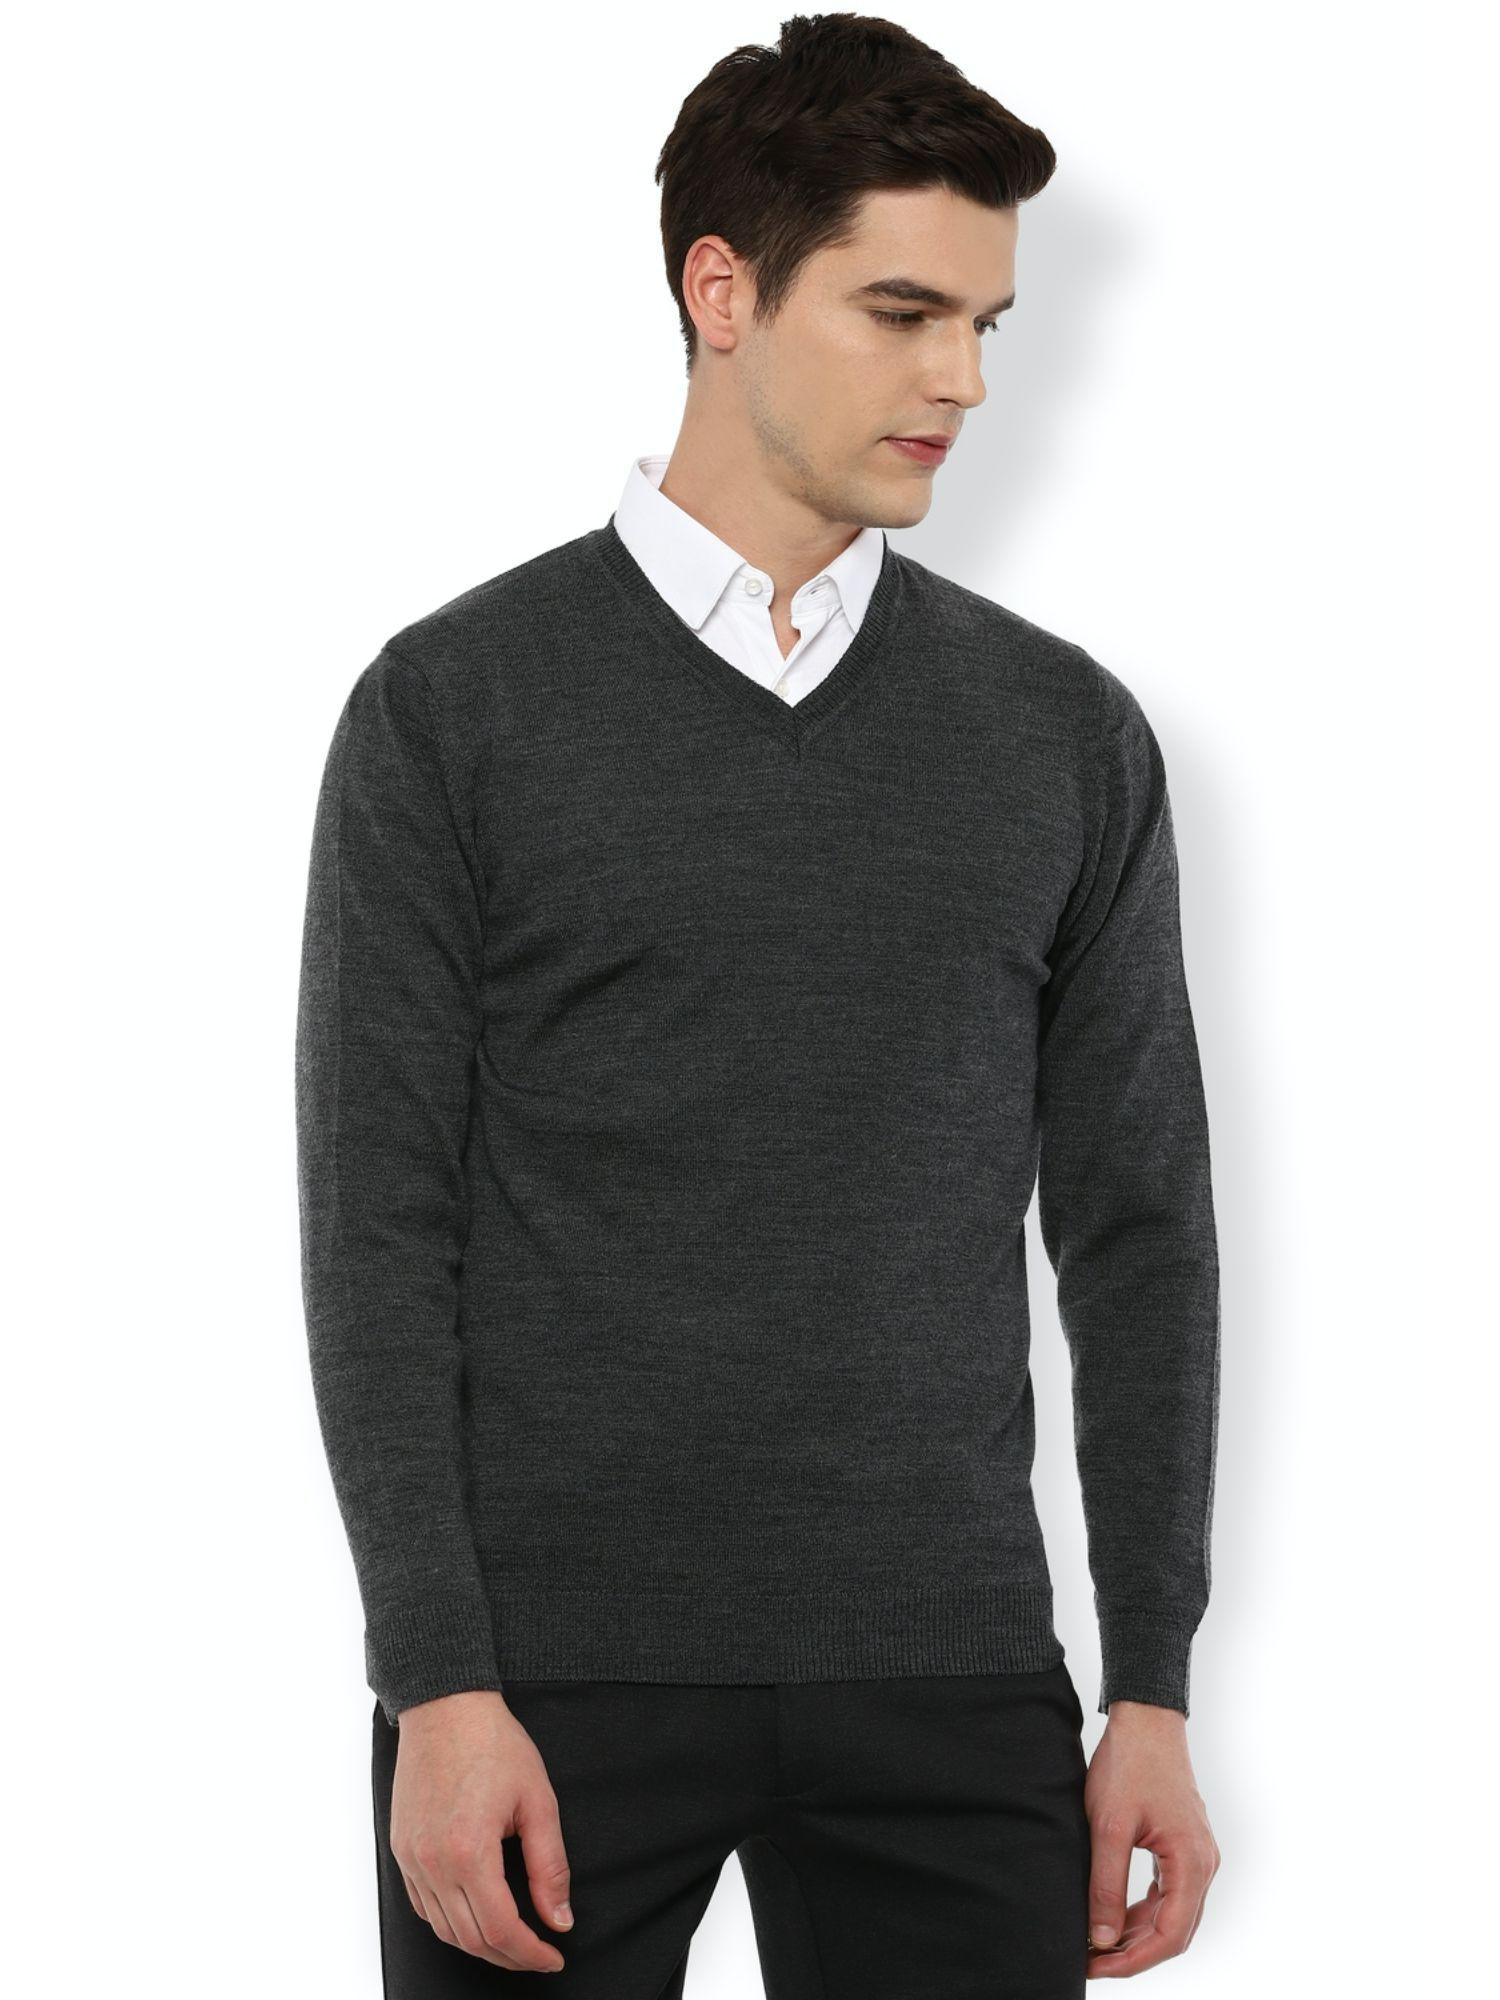 mens solid grey sweater